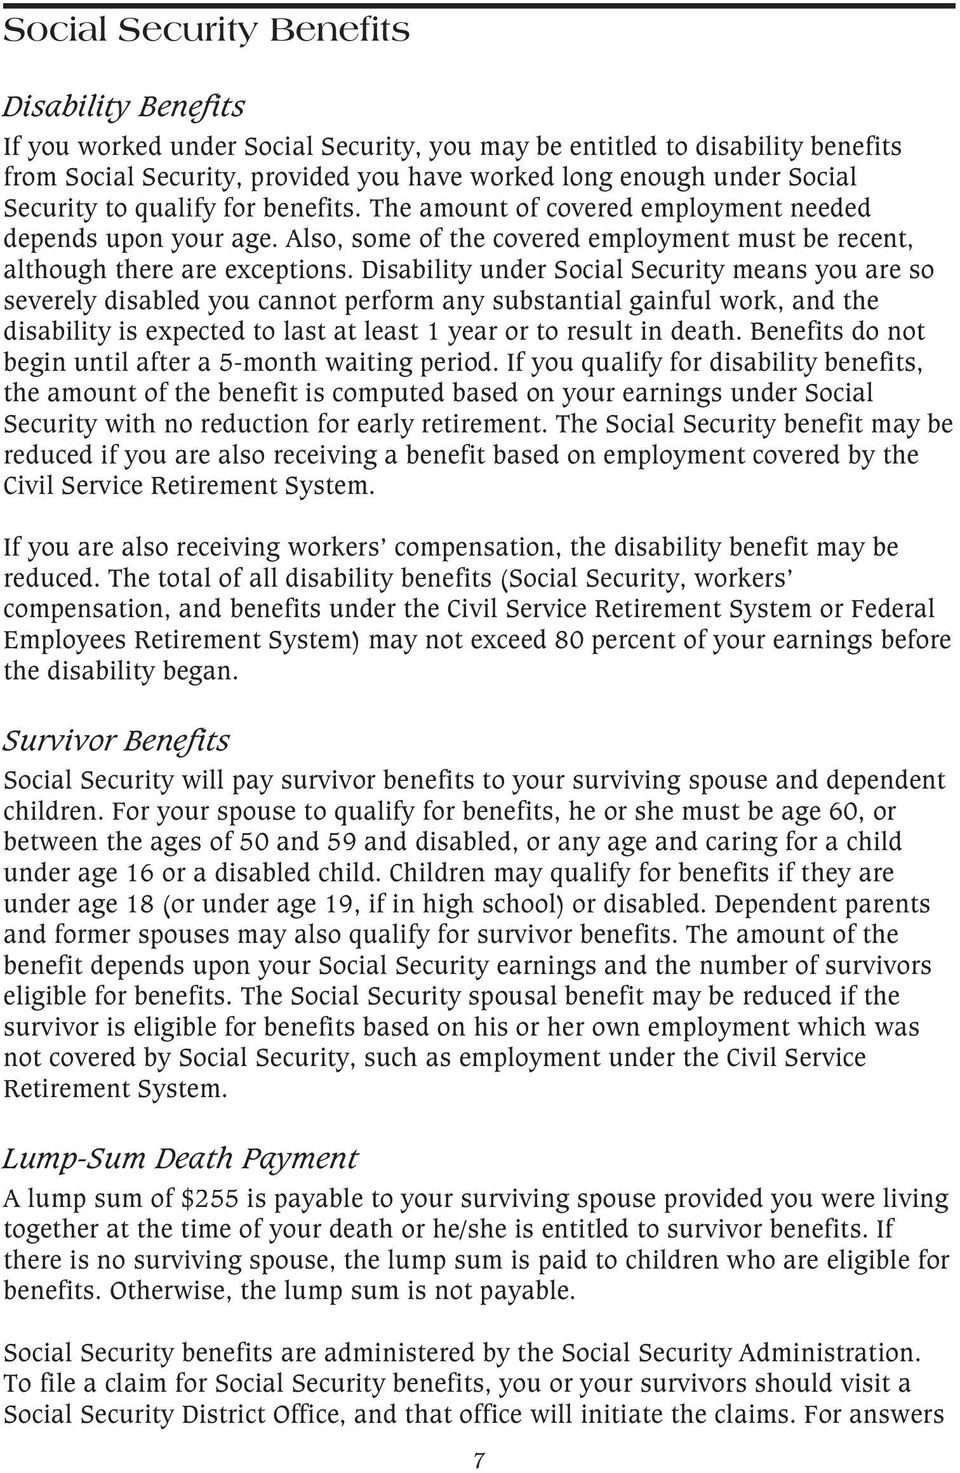 Disability under Social Security means you are so severely disabled you cannot perform any substantial gainful work, and the disability is expected to last at least 1 year or to result in death.